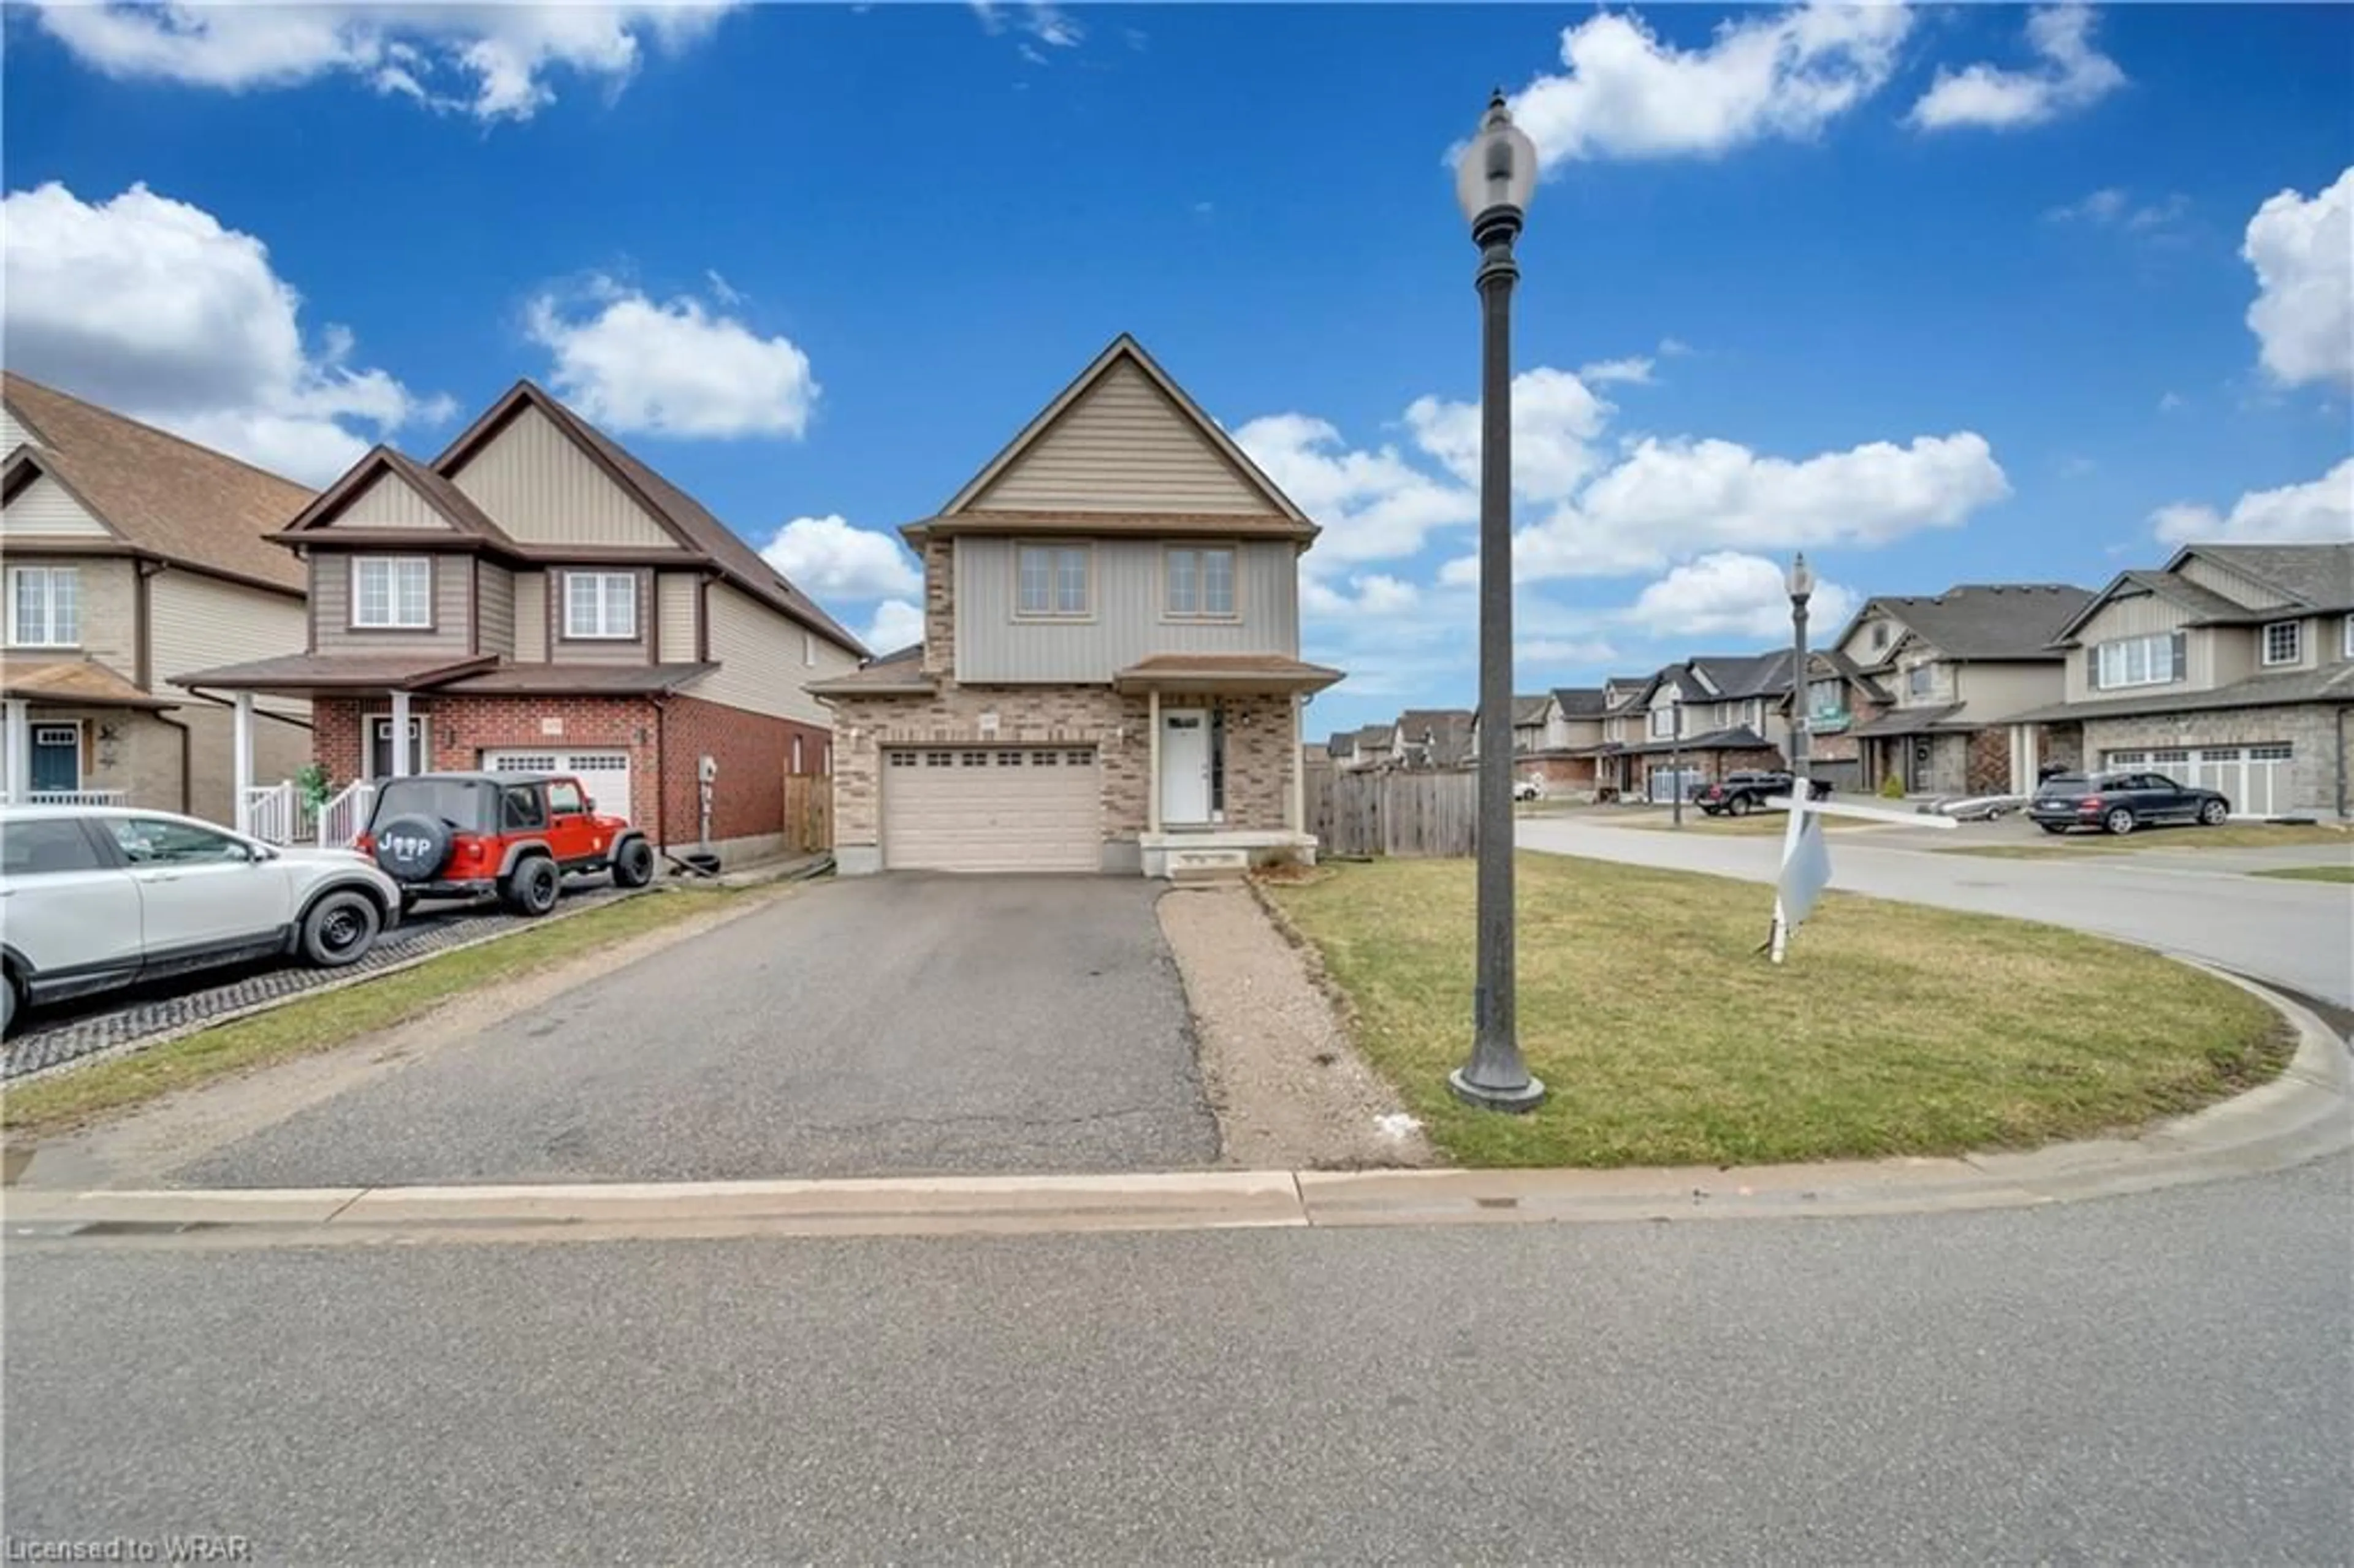 Frontside or backside of a home for 1177 Caen Ave, Woodstock Ontario N4T 0G3